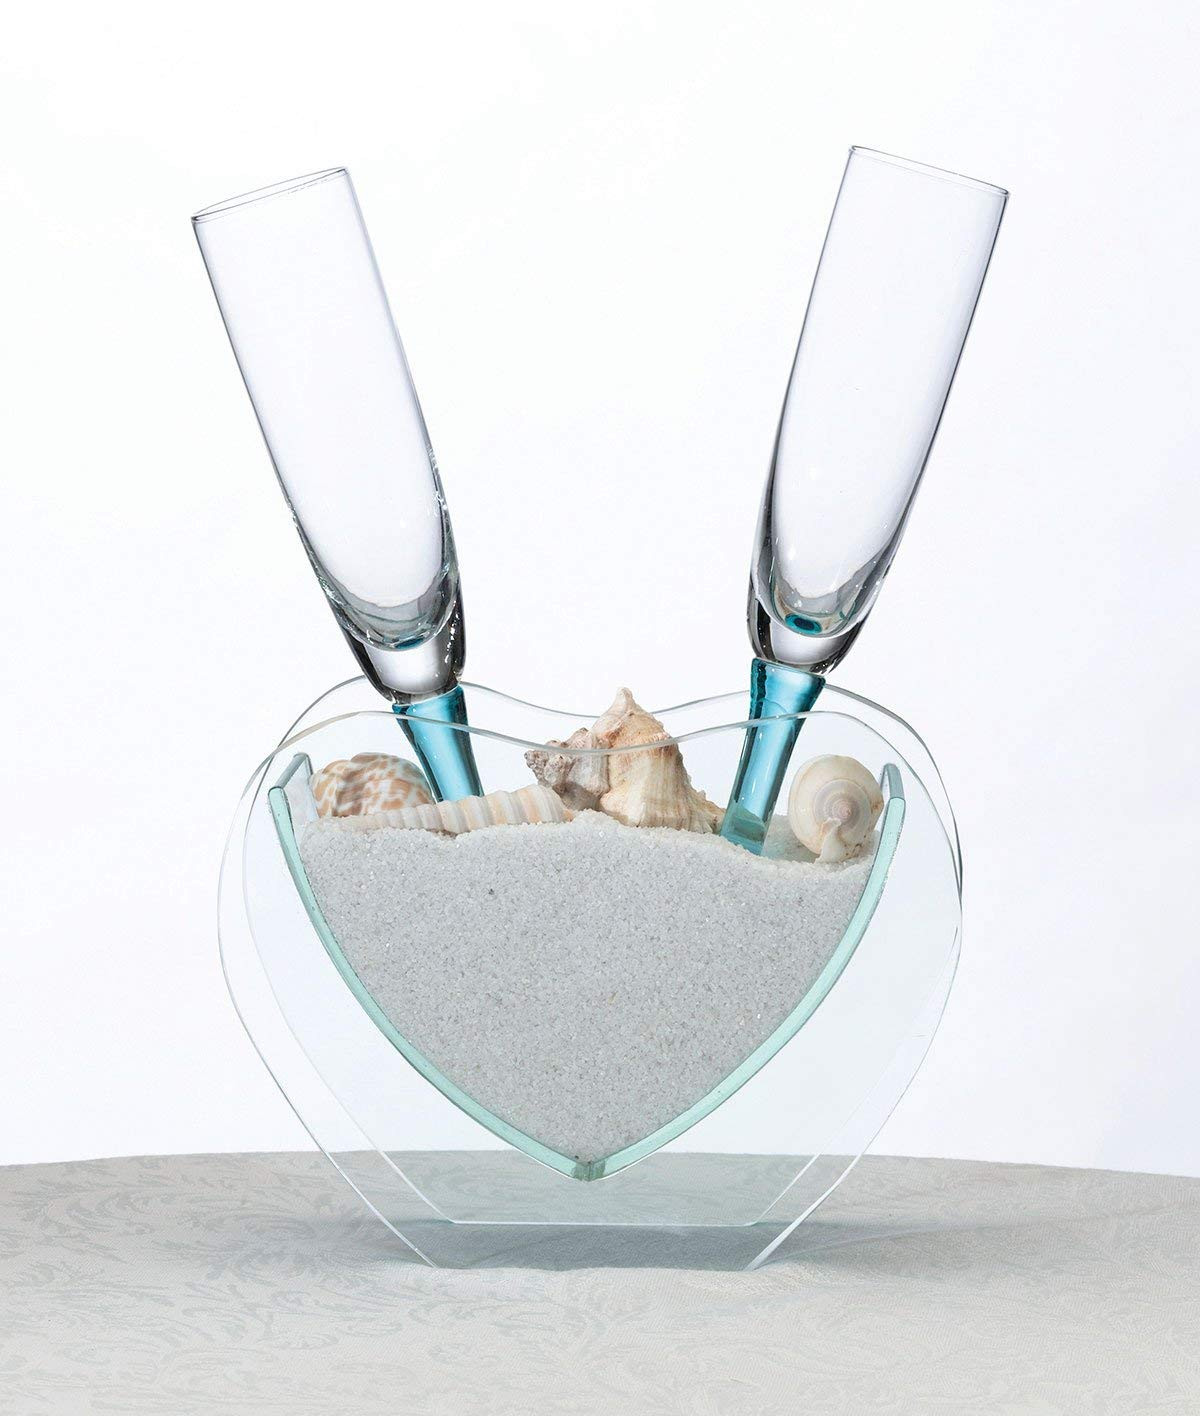 19 Lovely Heart Shaped Glass Vase 2024 free download heart shaped glass vase of amazon com lillian rose coastal beach glasses with heart vase and regarding amazon com lillian rose coastal beach glasses with heart vase and sand champagne glasse